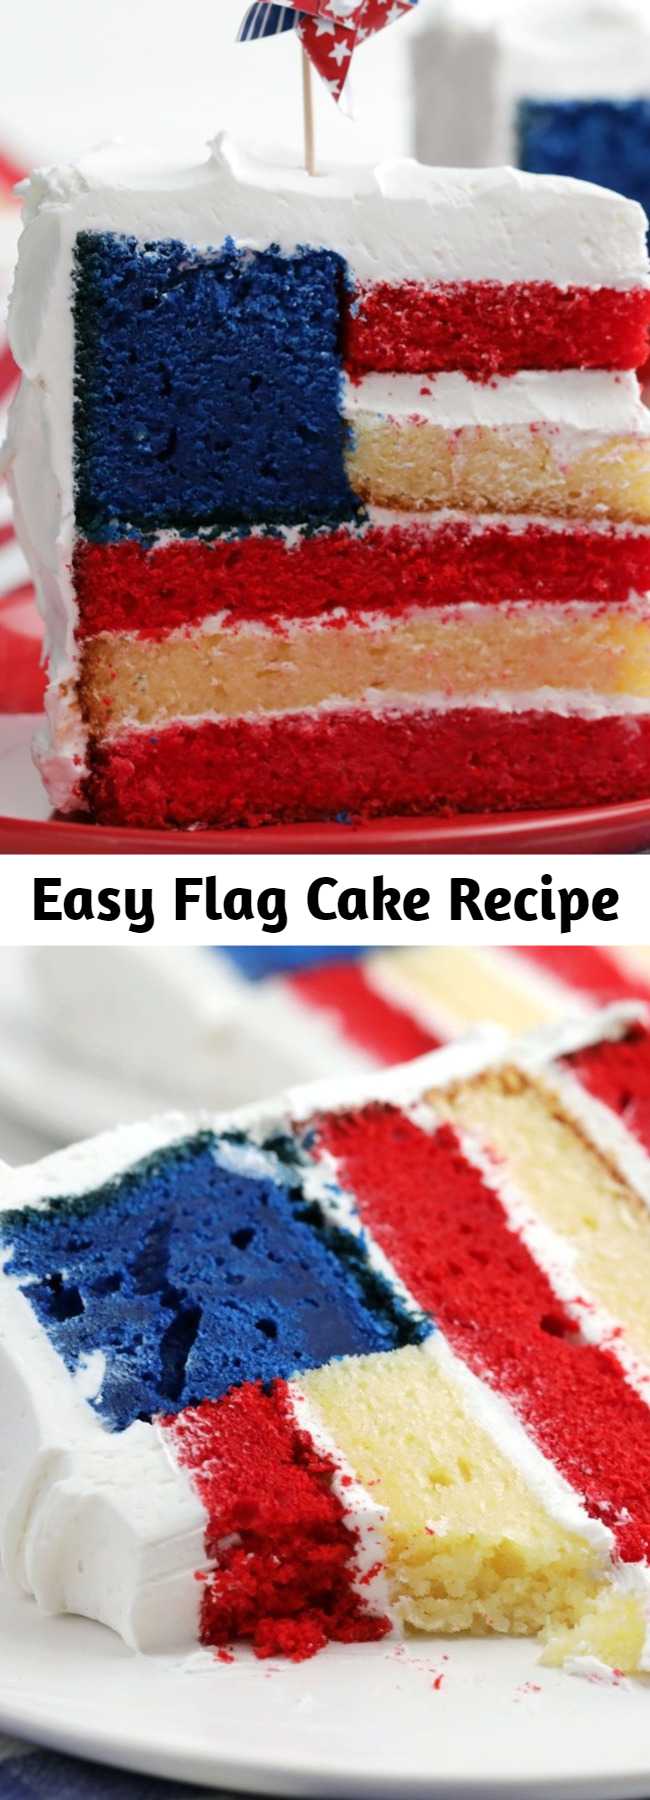 Don’t be intimidated by the layers of tender red, white and blue cake though, the directions for preparing this cake are straightforward and the results are stunning. Serve up patriotism by the slice.